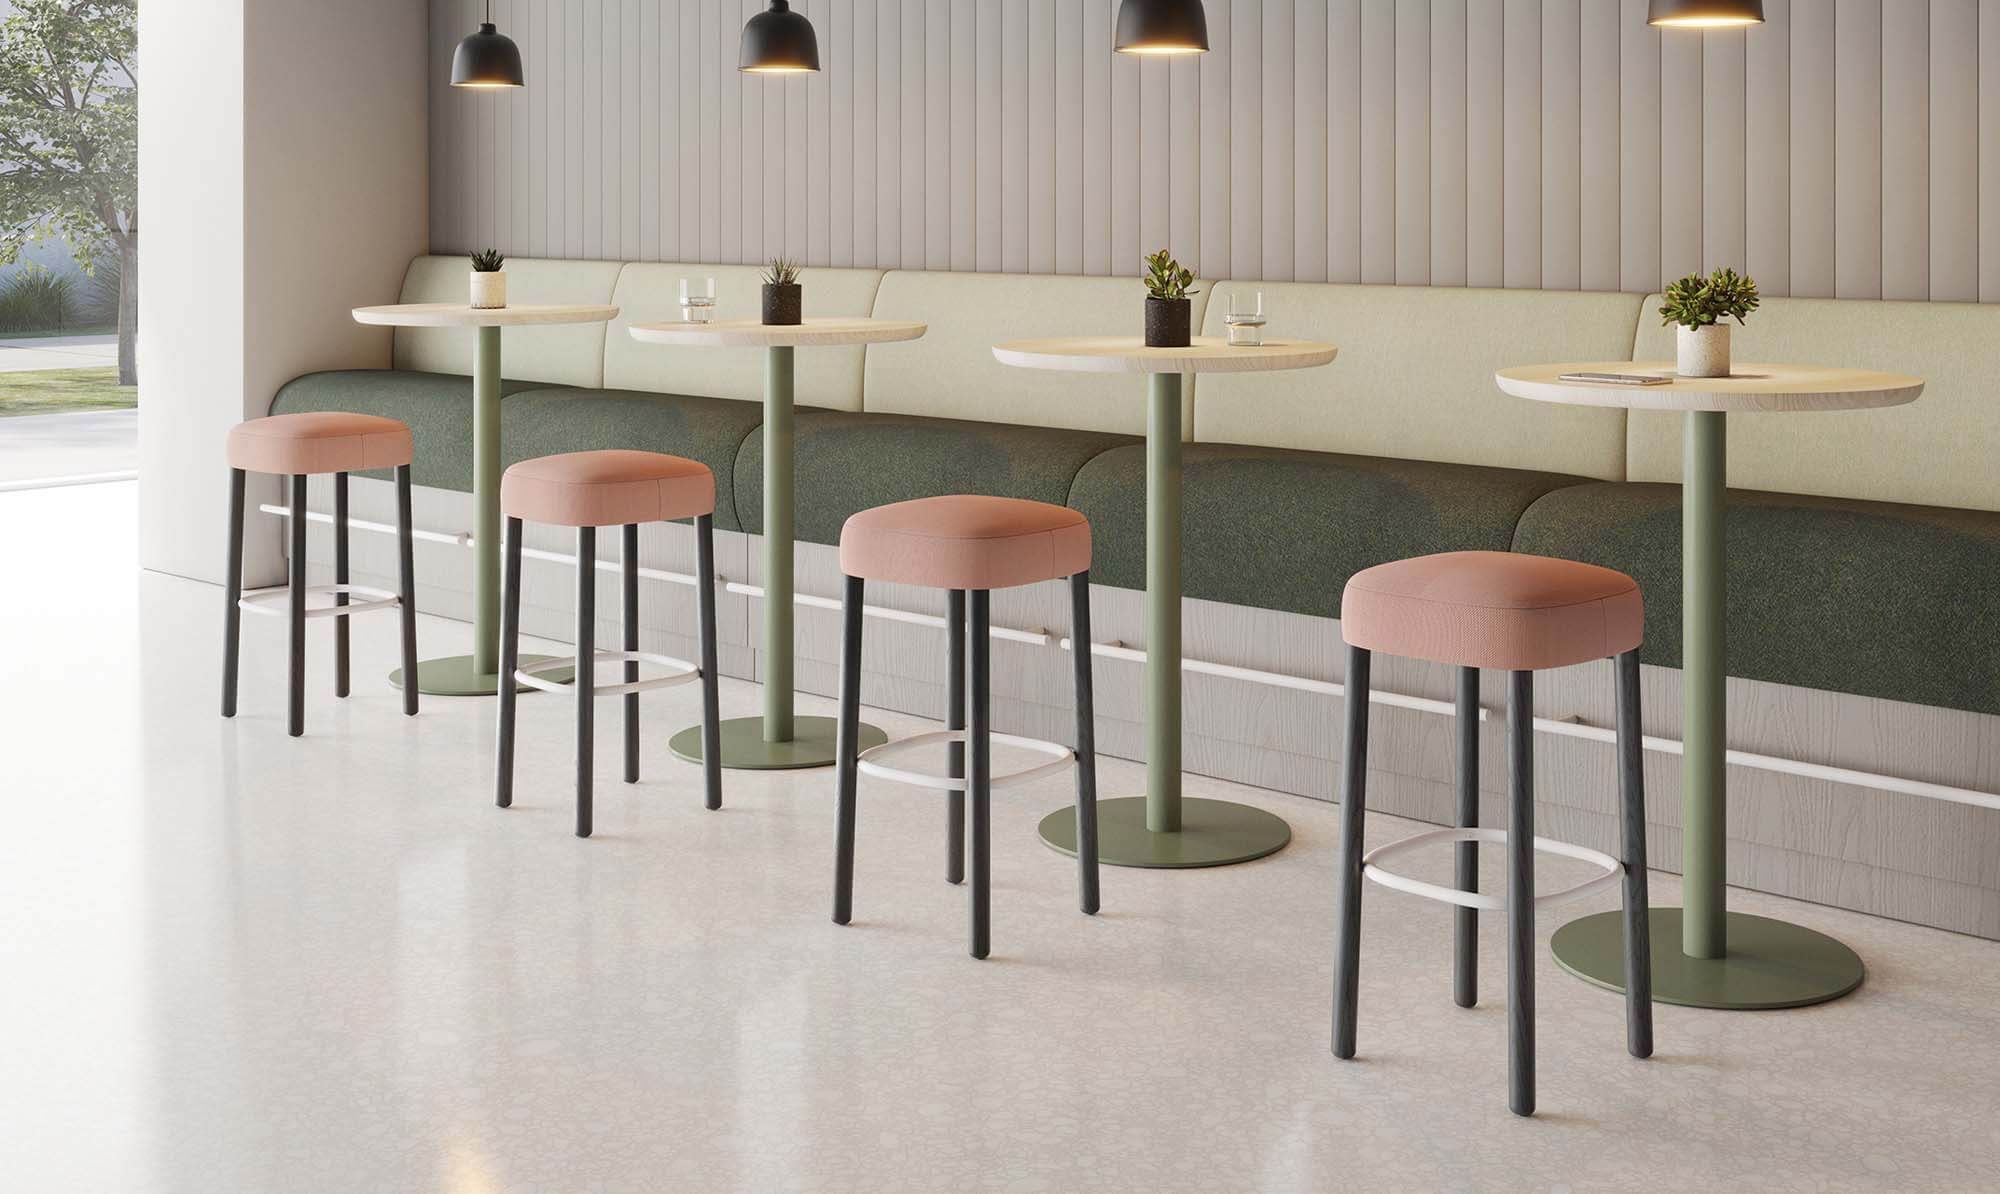 pink stools with green seating